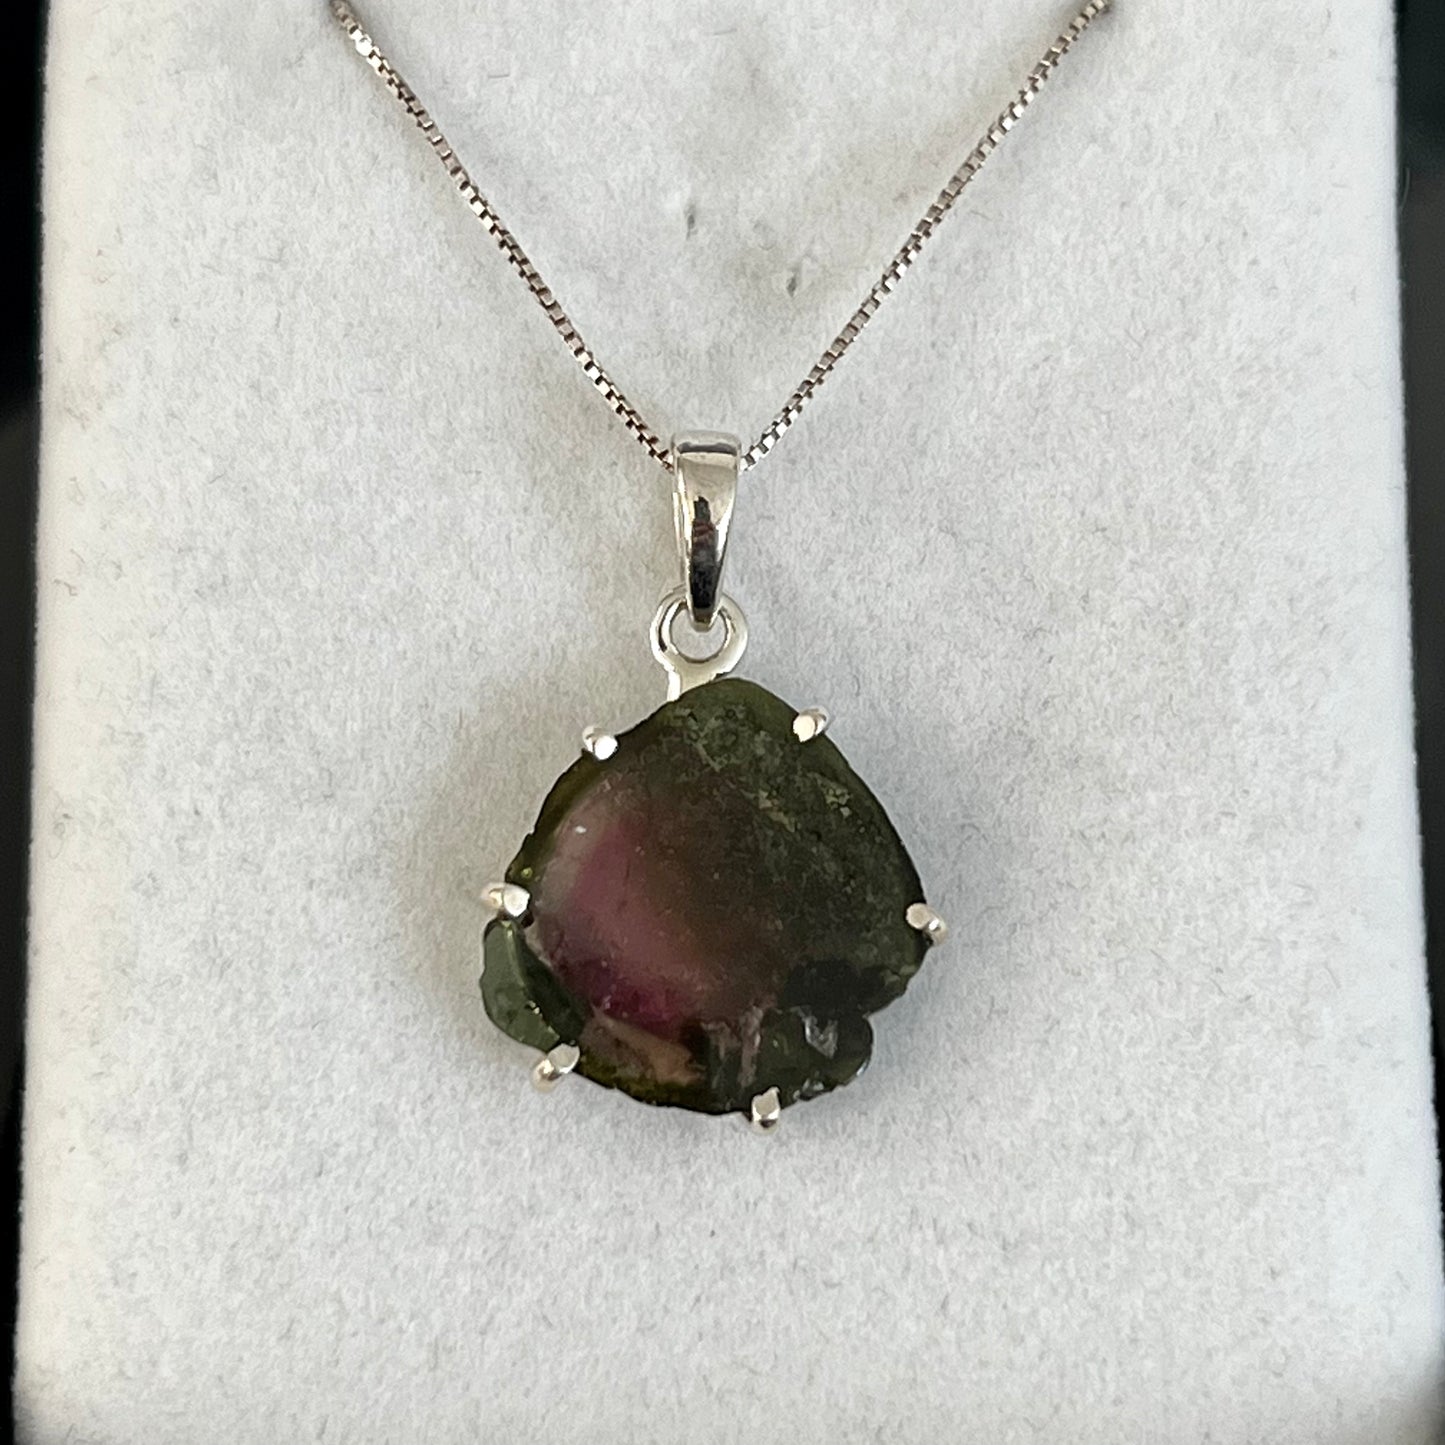 Watermelon Tourmaline Sterling Silver Necklace